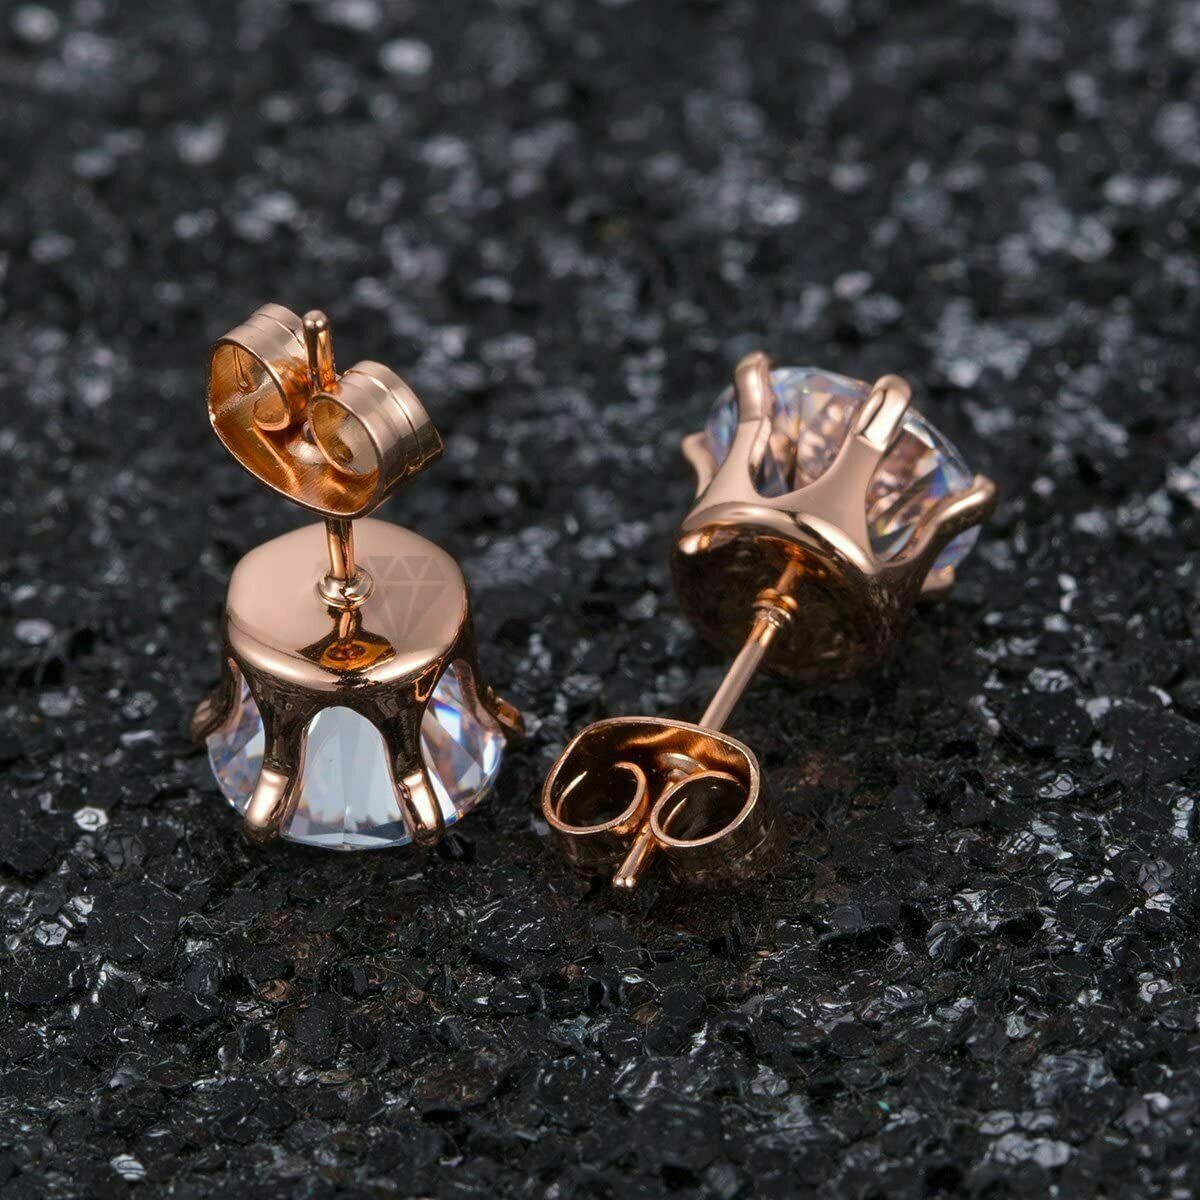 316L Surgical Steel 6MM Diamond Cut Rose Gold Plated Cartilage Ear Stud Earrings